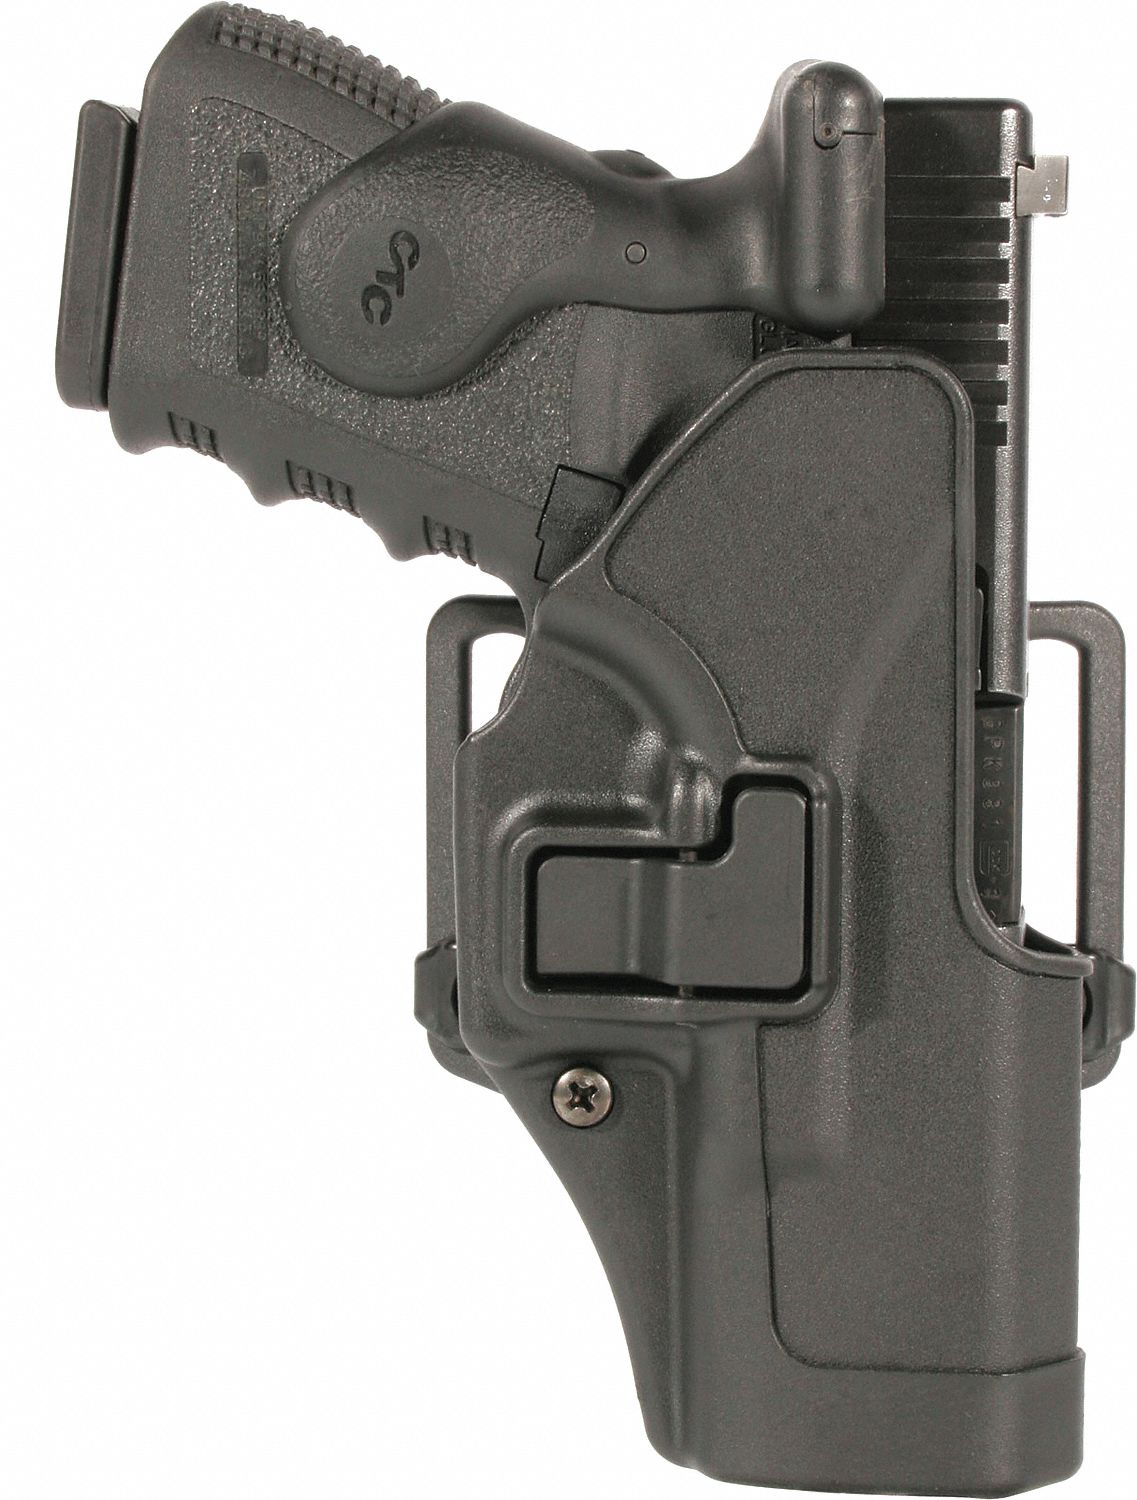 Details about  / Blackhawk 410541BK-R Right Hand Serpa CQC Holster w// Paddle Fits Ruger SR9 RIGHT